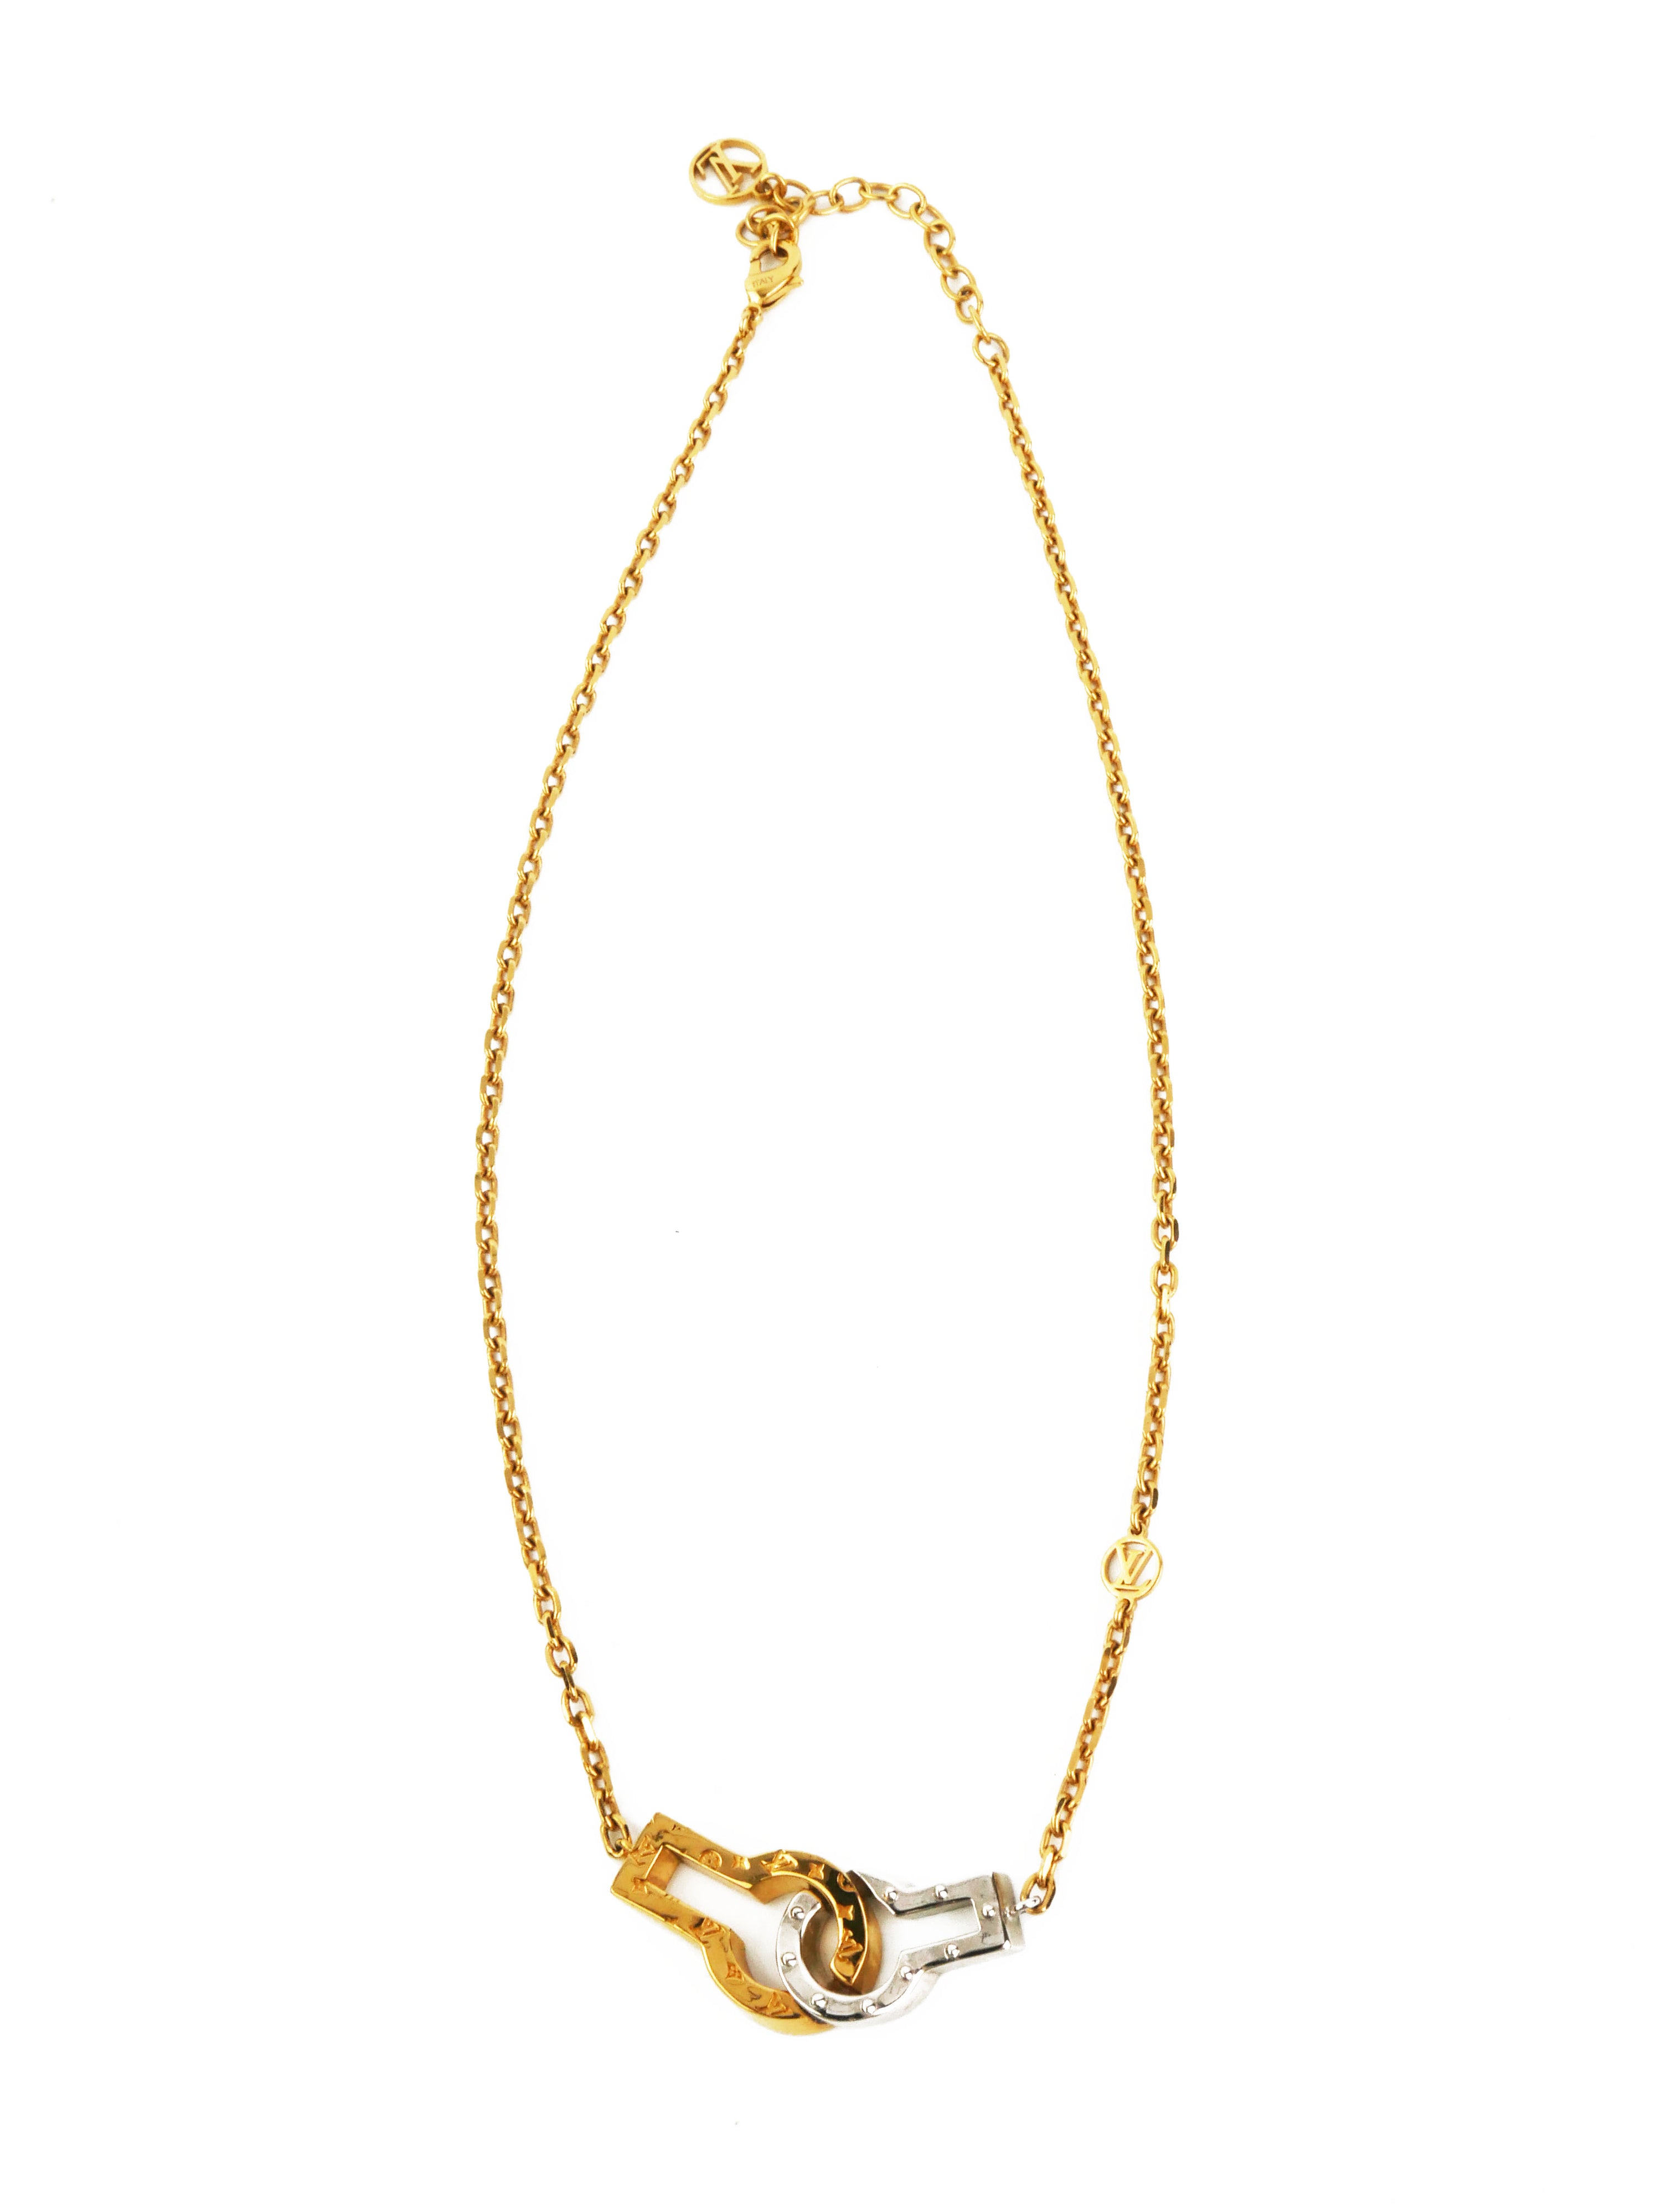 Louis Vuitton Gold & Silver Twin Locks Necklace